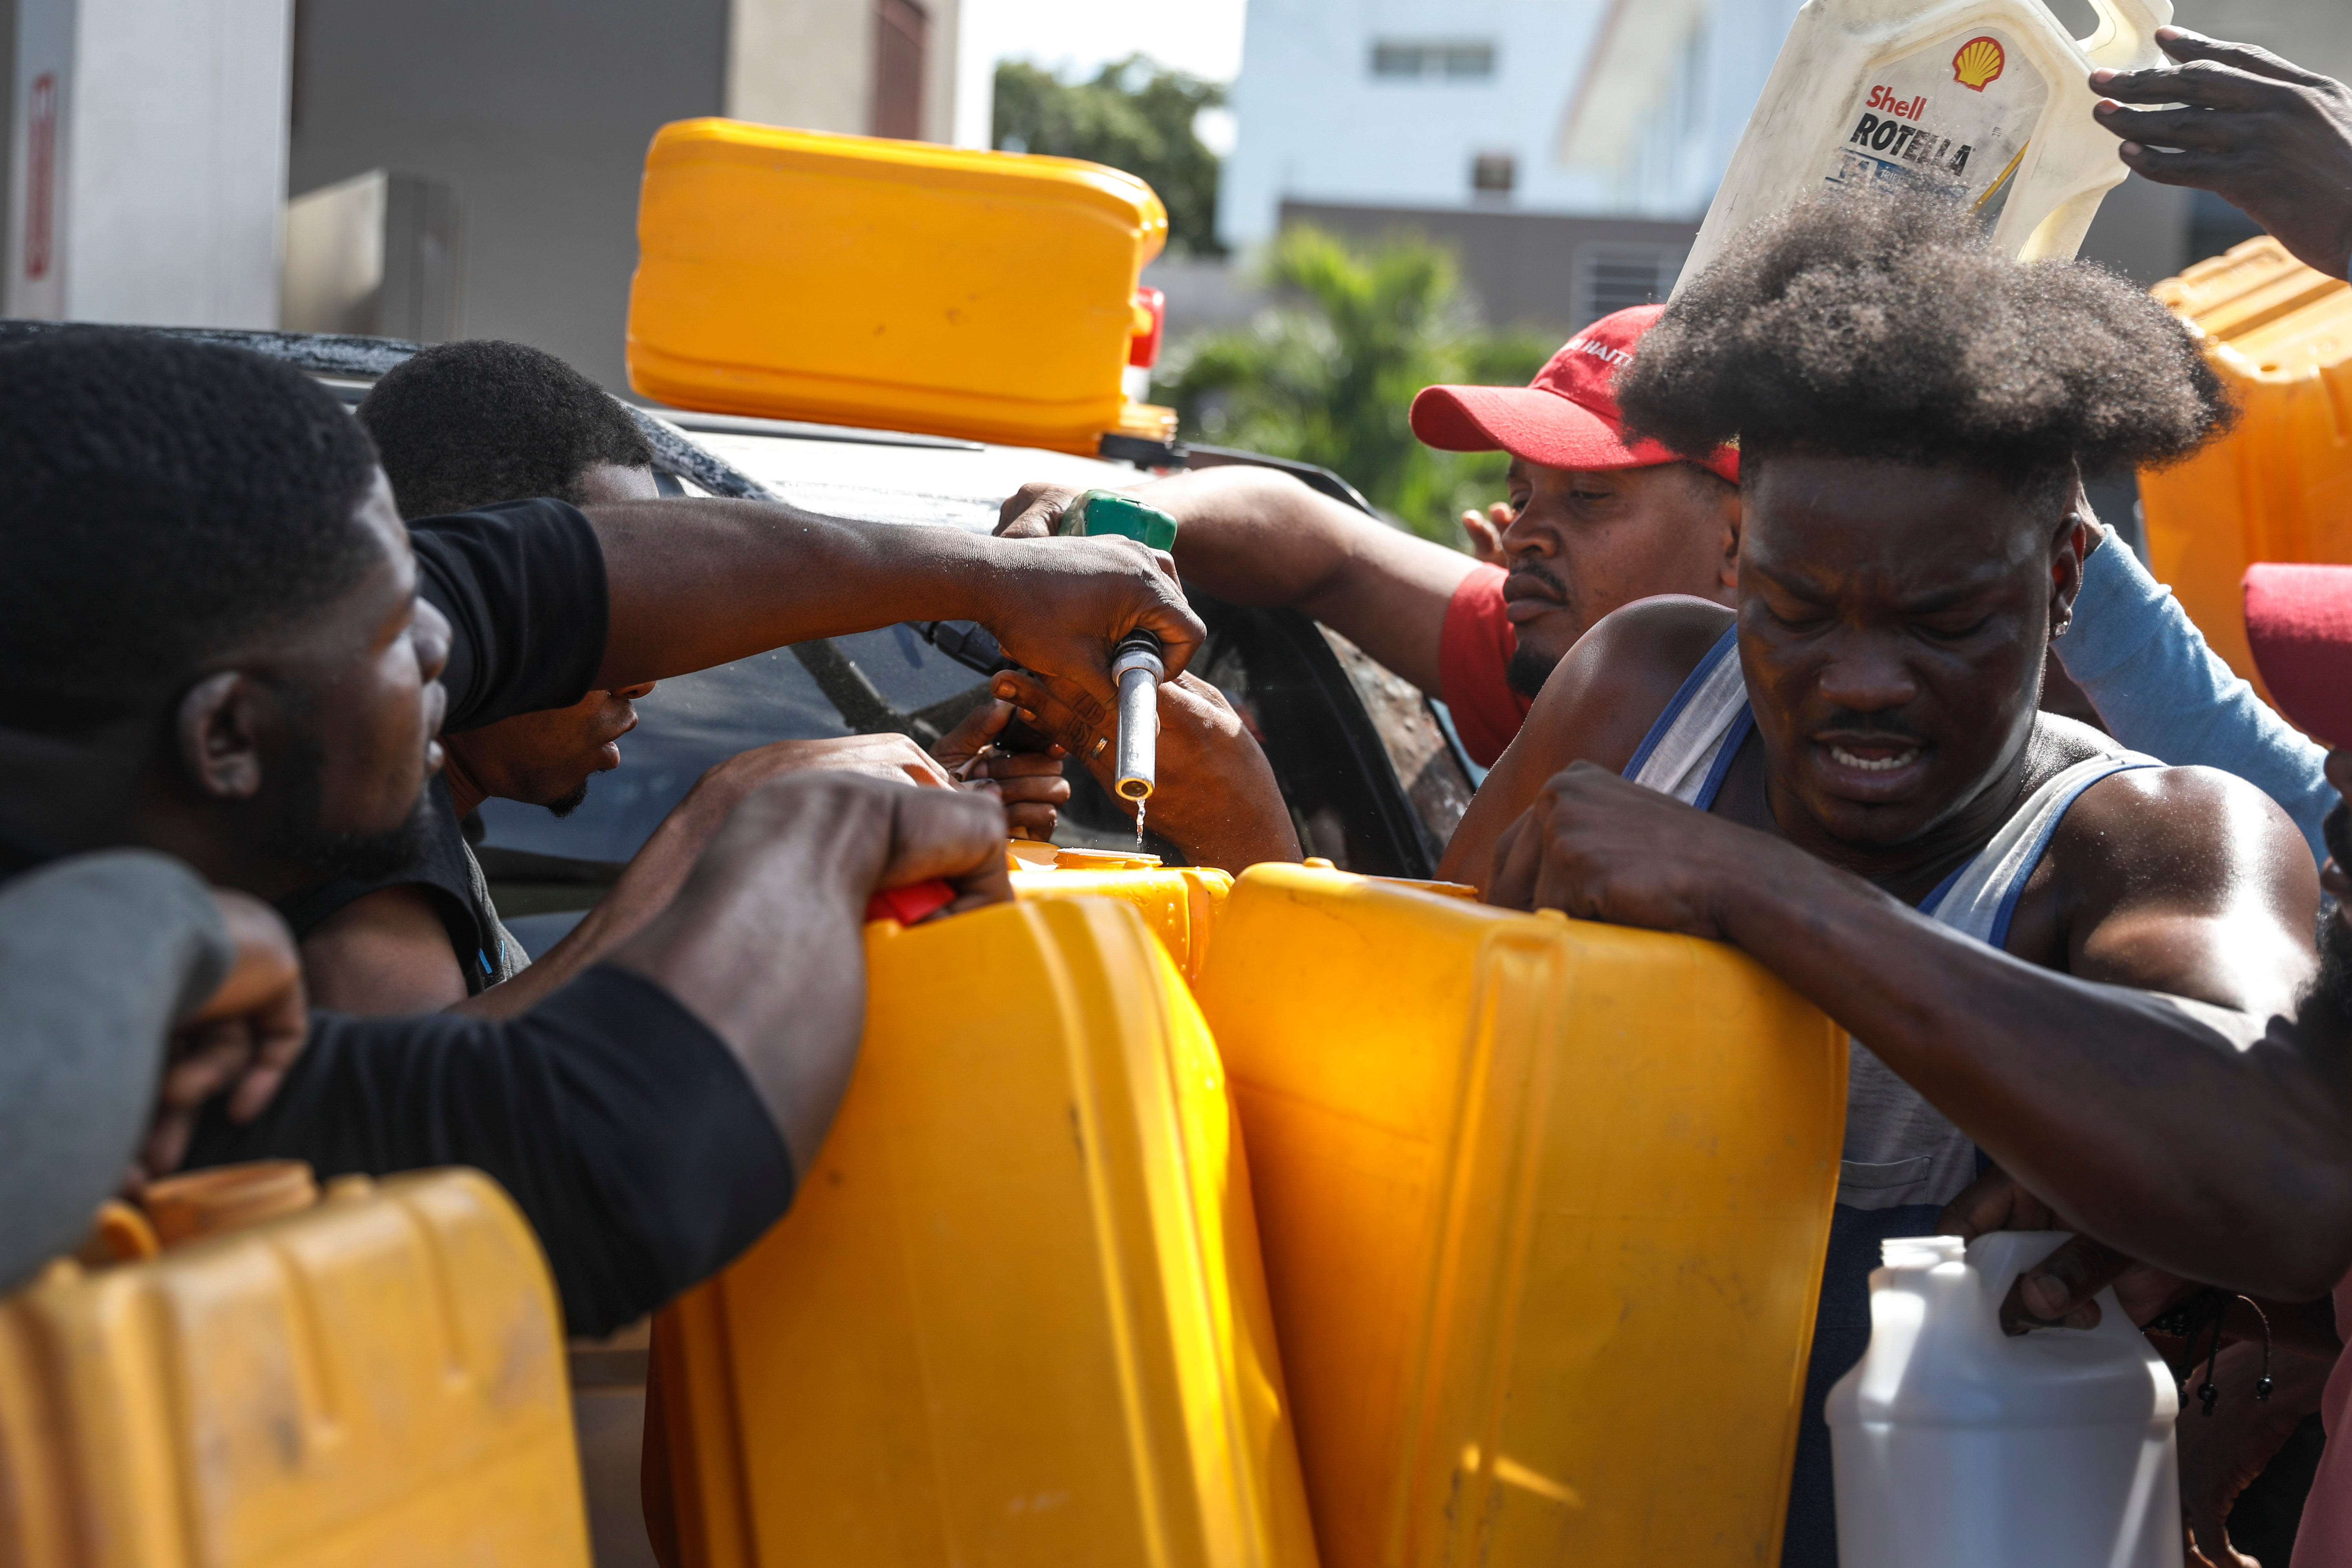 People push and shove as they try to get their gas tanks filled at a gas station in Port-au-Prince, Haiti.